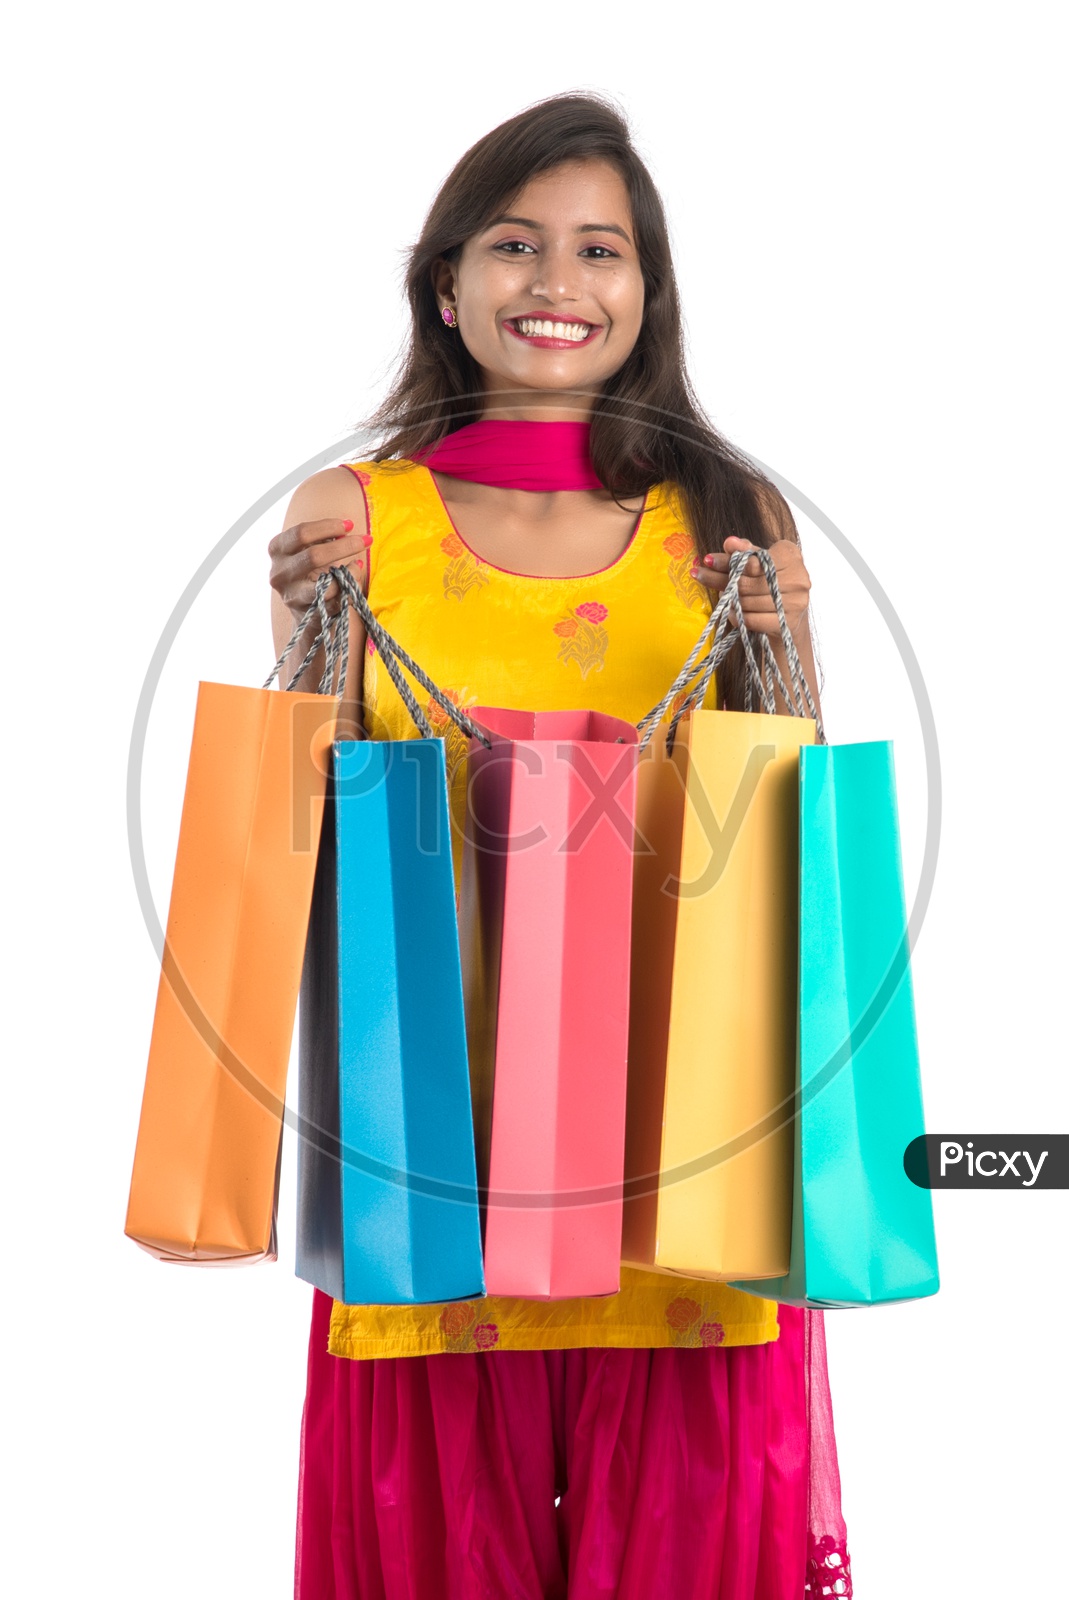 Young Indian Woman Or Girl Happily Smiling With Shopping Bags On an Isolated White background